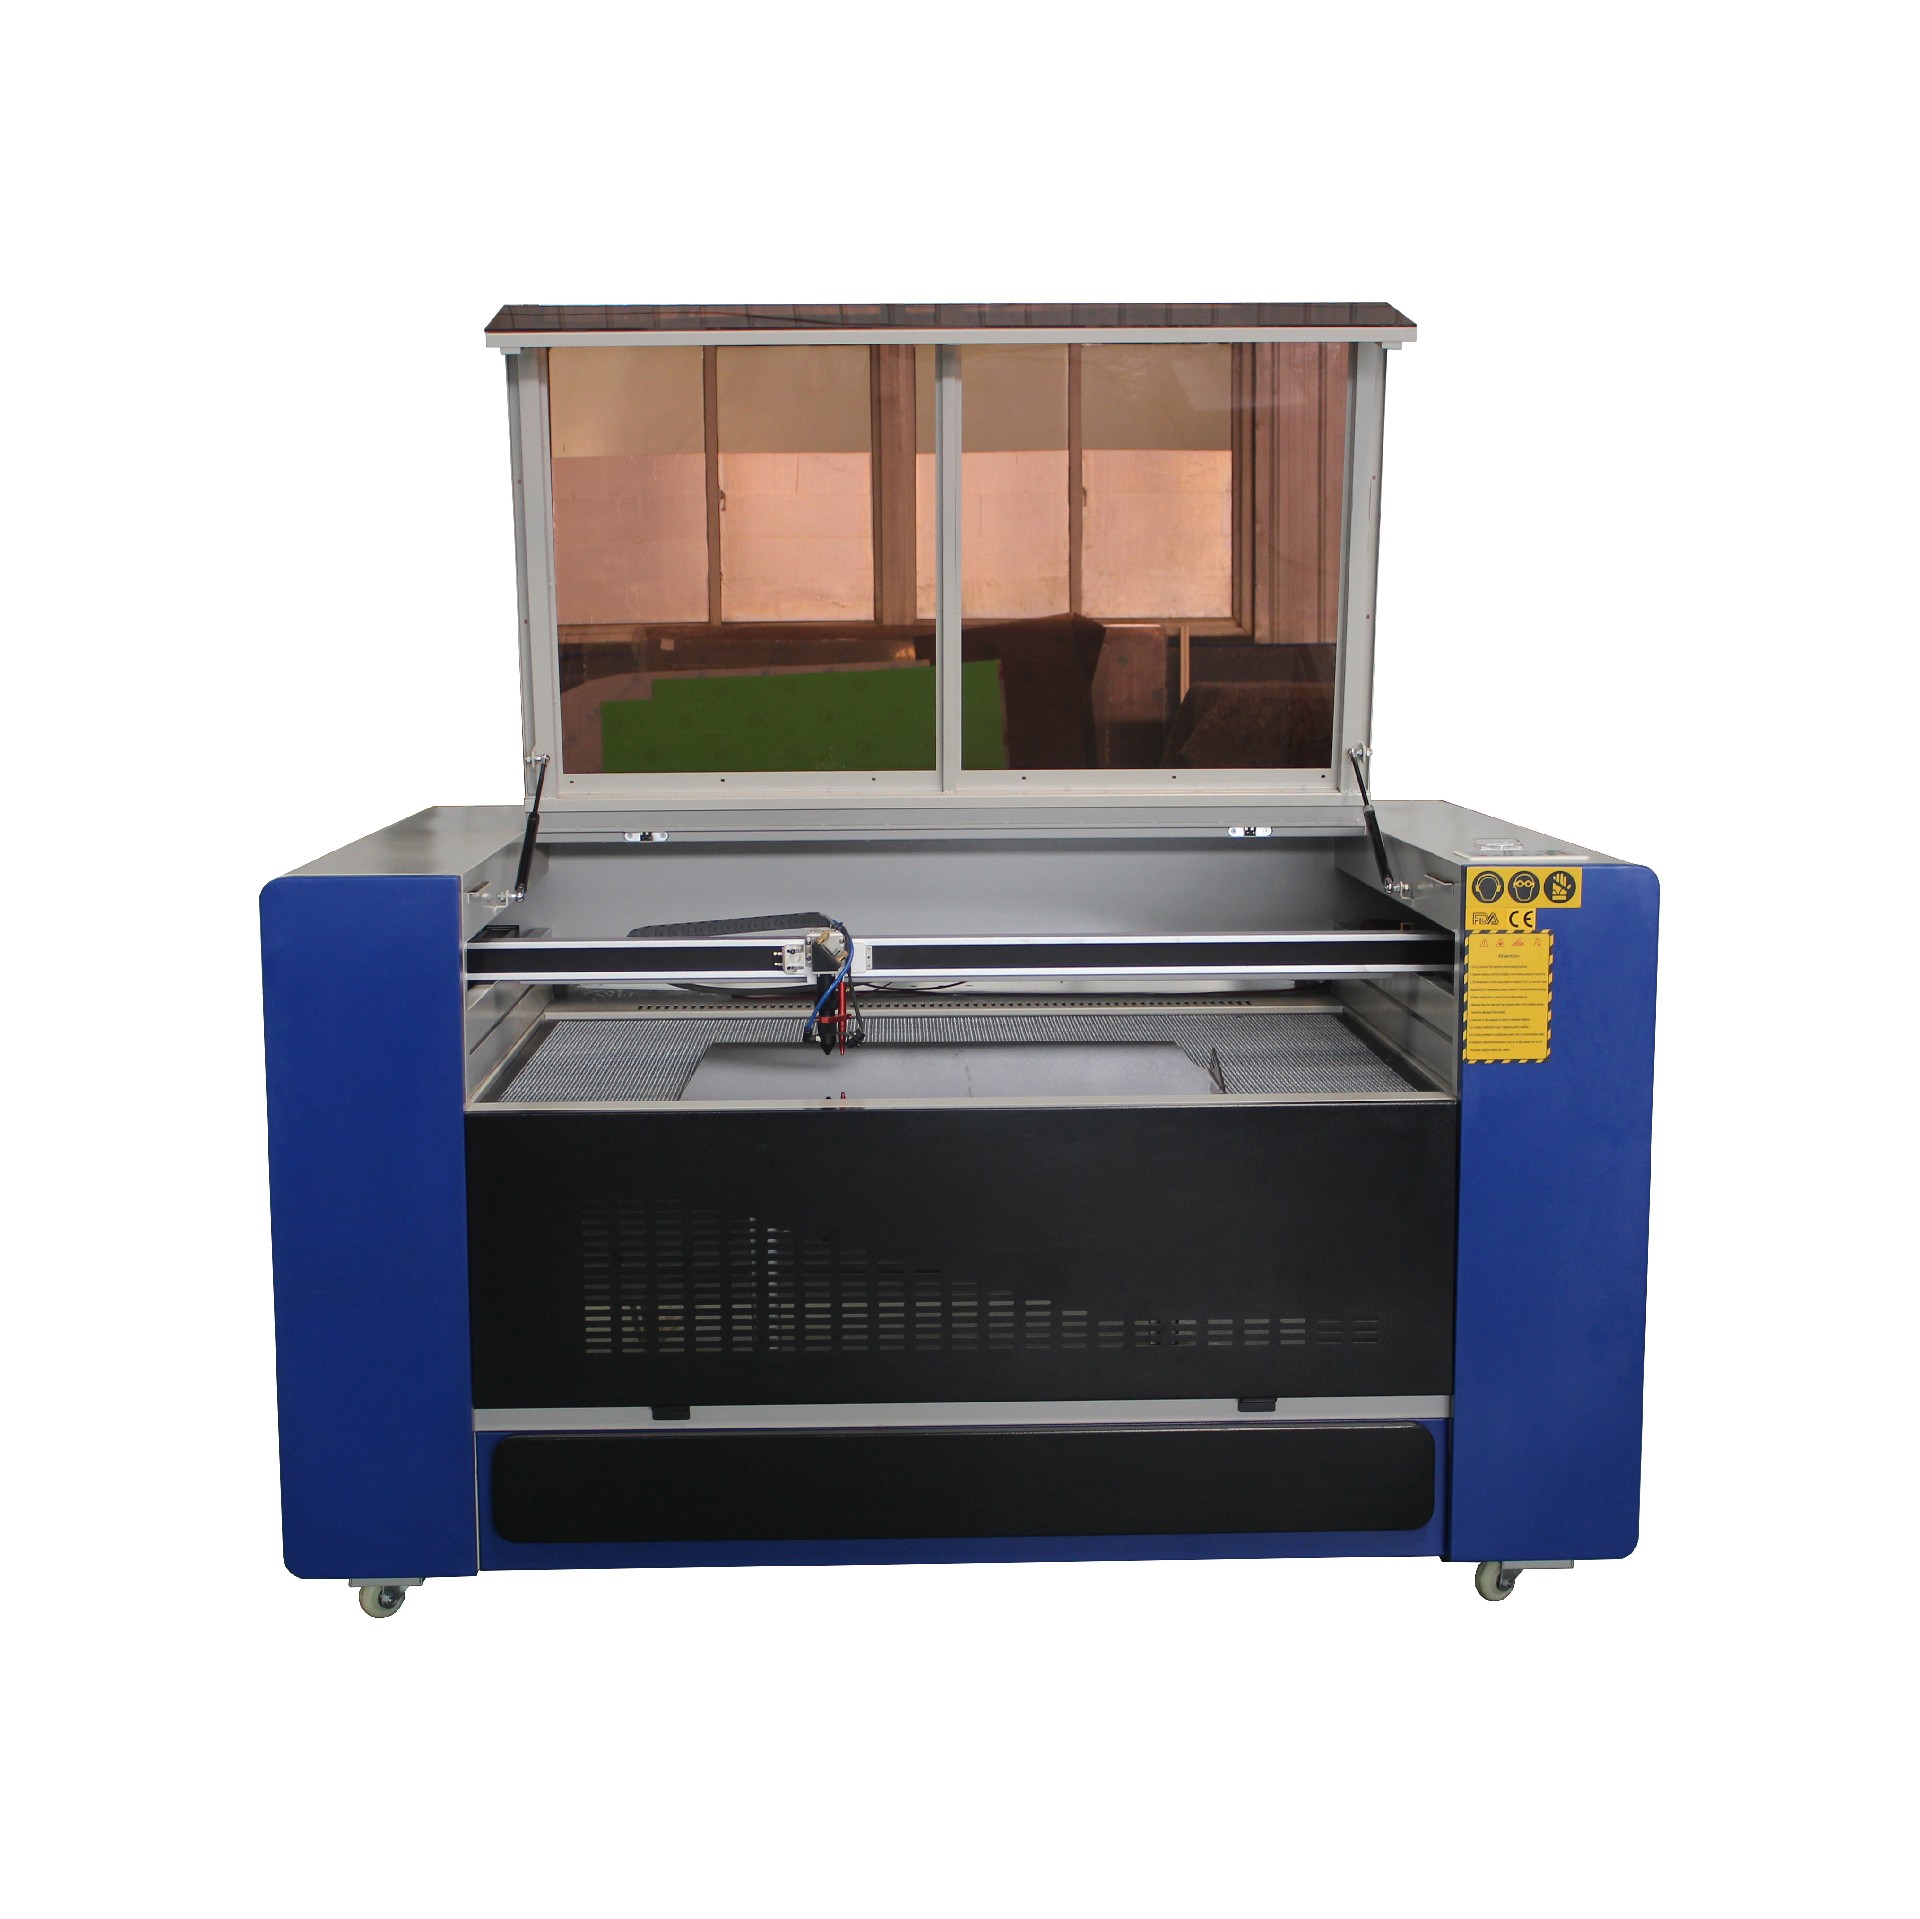 New Design HT-1390 CO2 Laser Engraving And Cutting Machine